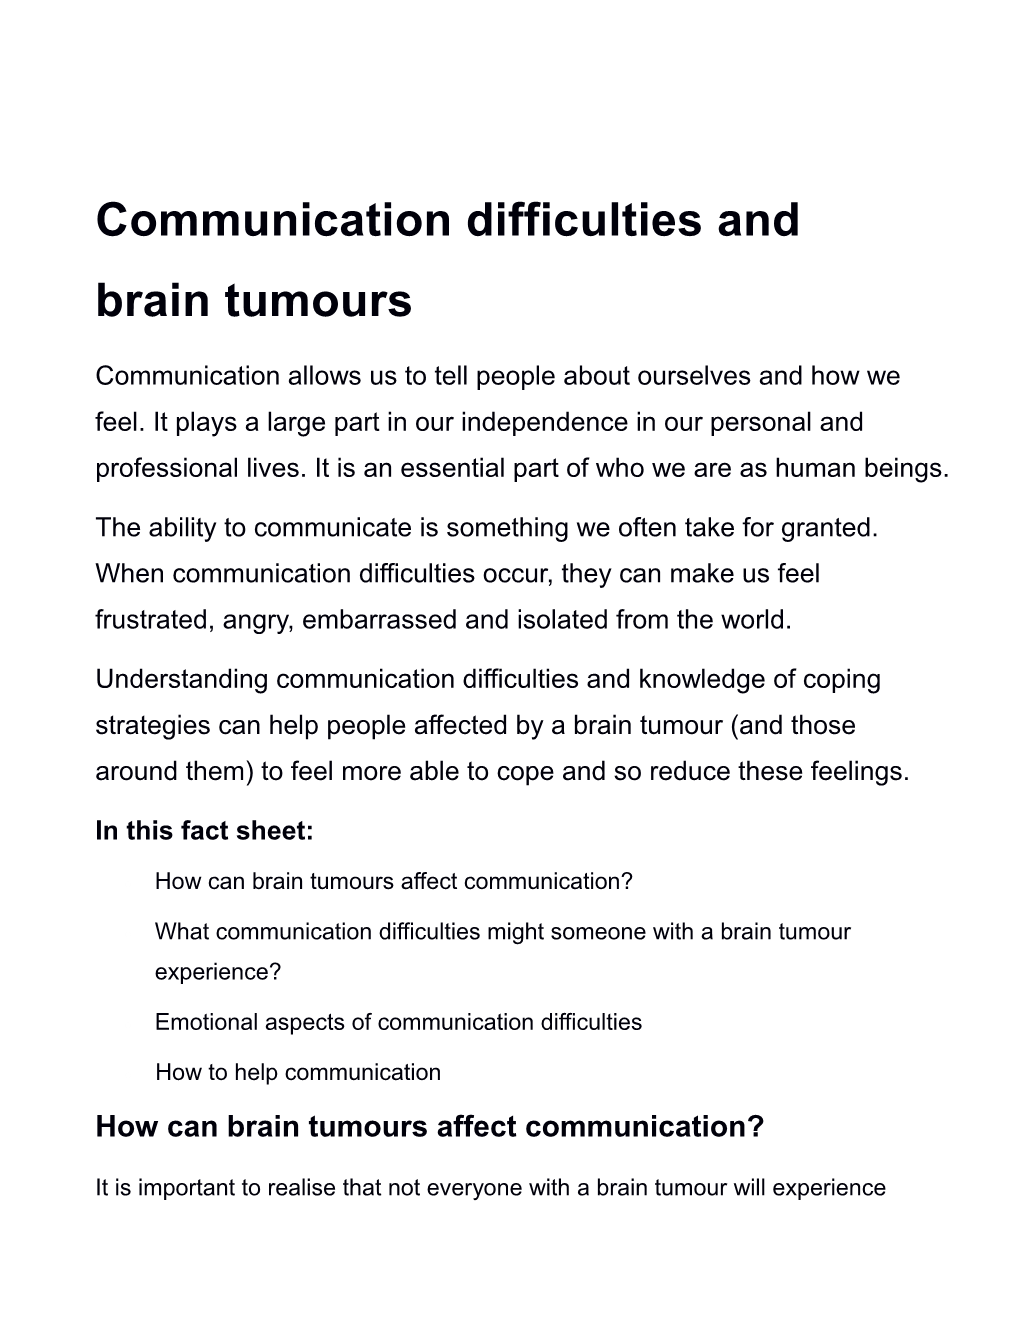 Communication Difficulties and Brain Tumours